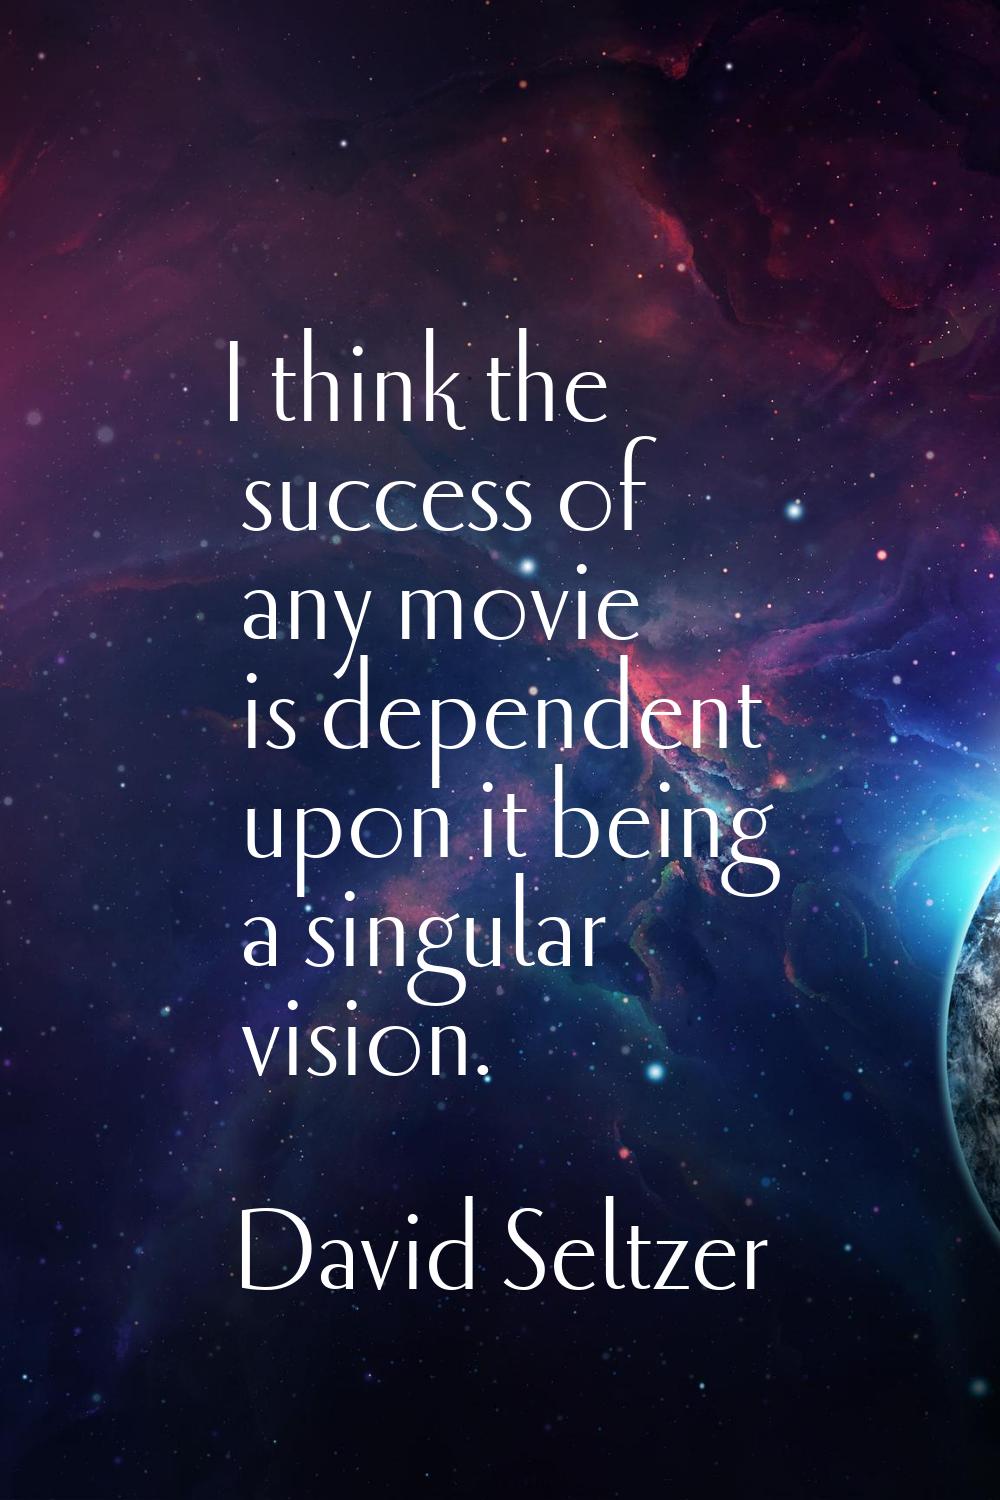 I think the success of any movie is dependent upon it being a singular vision.